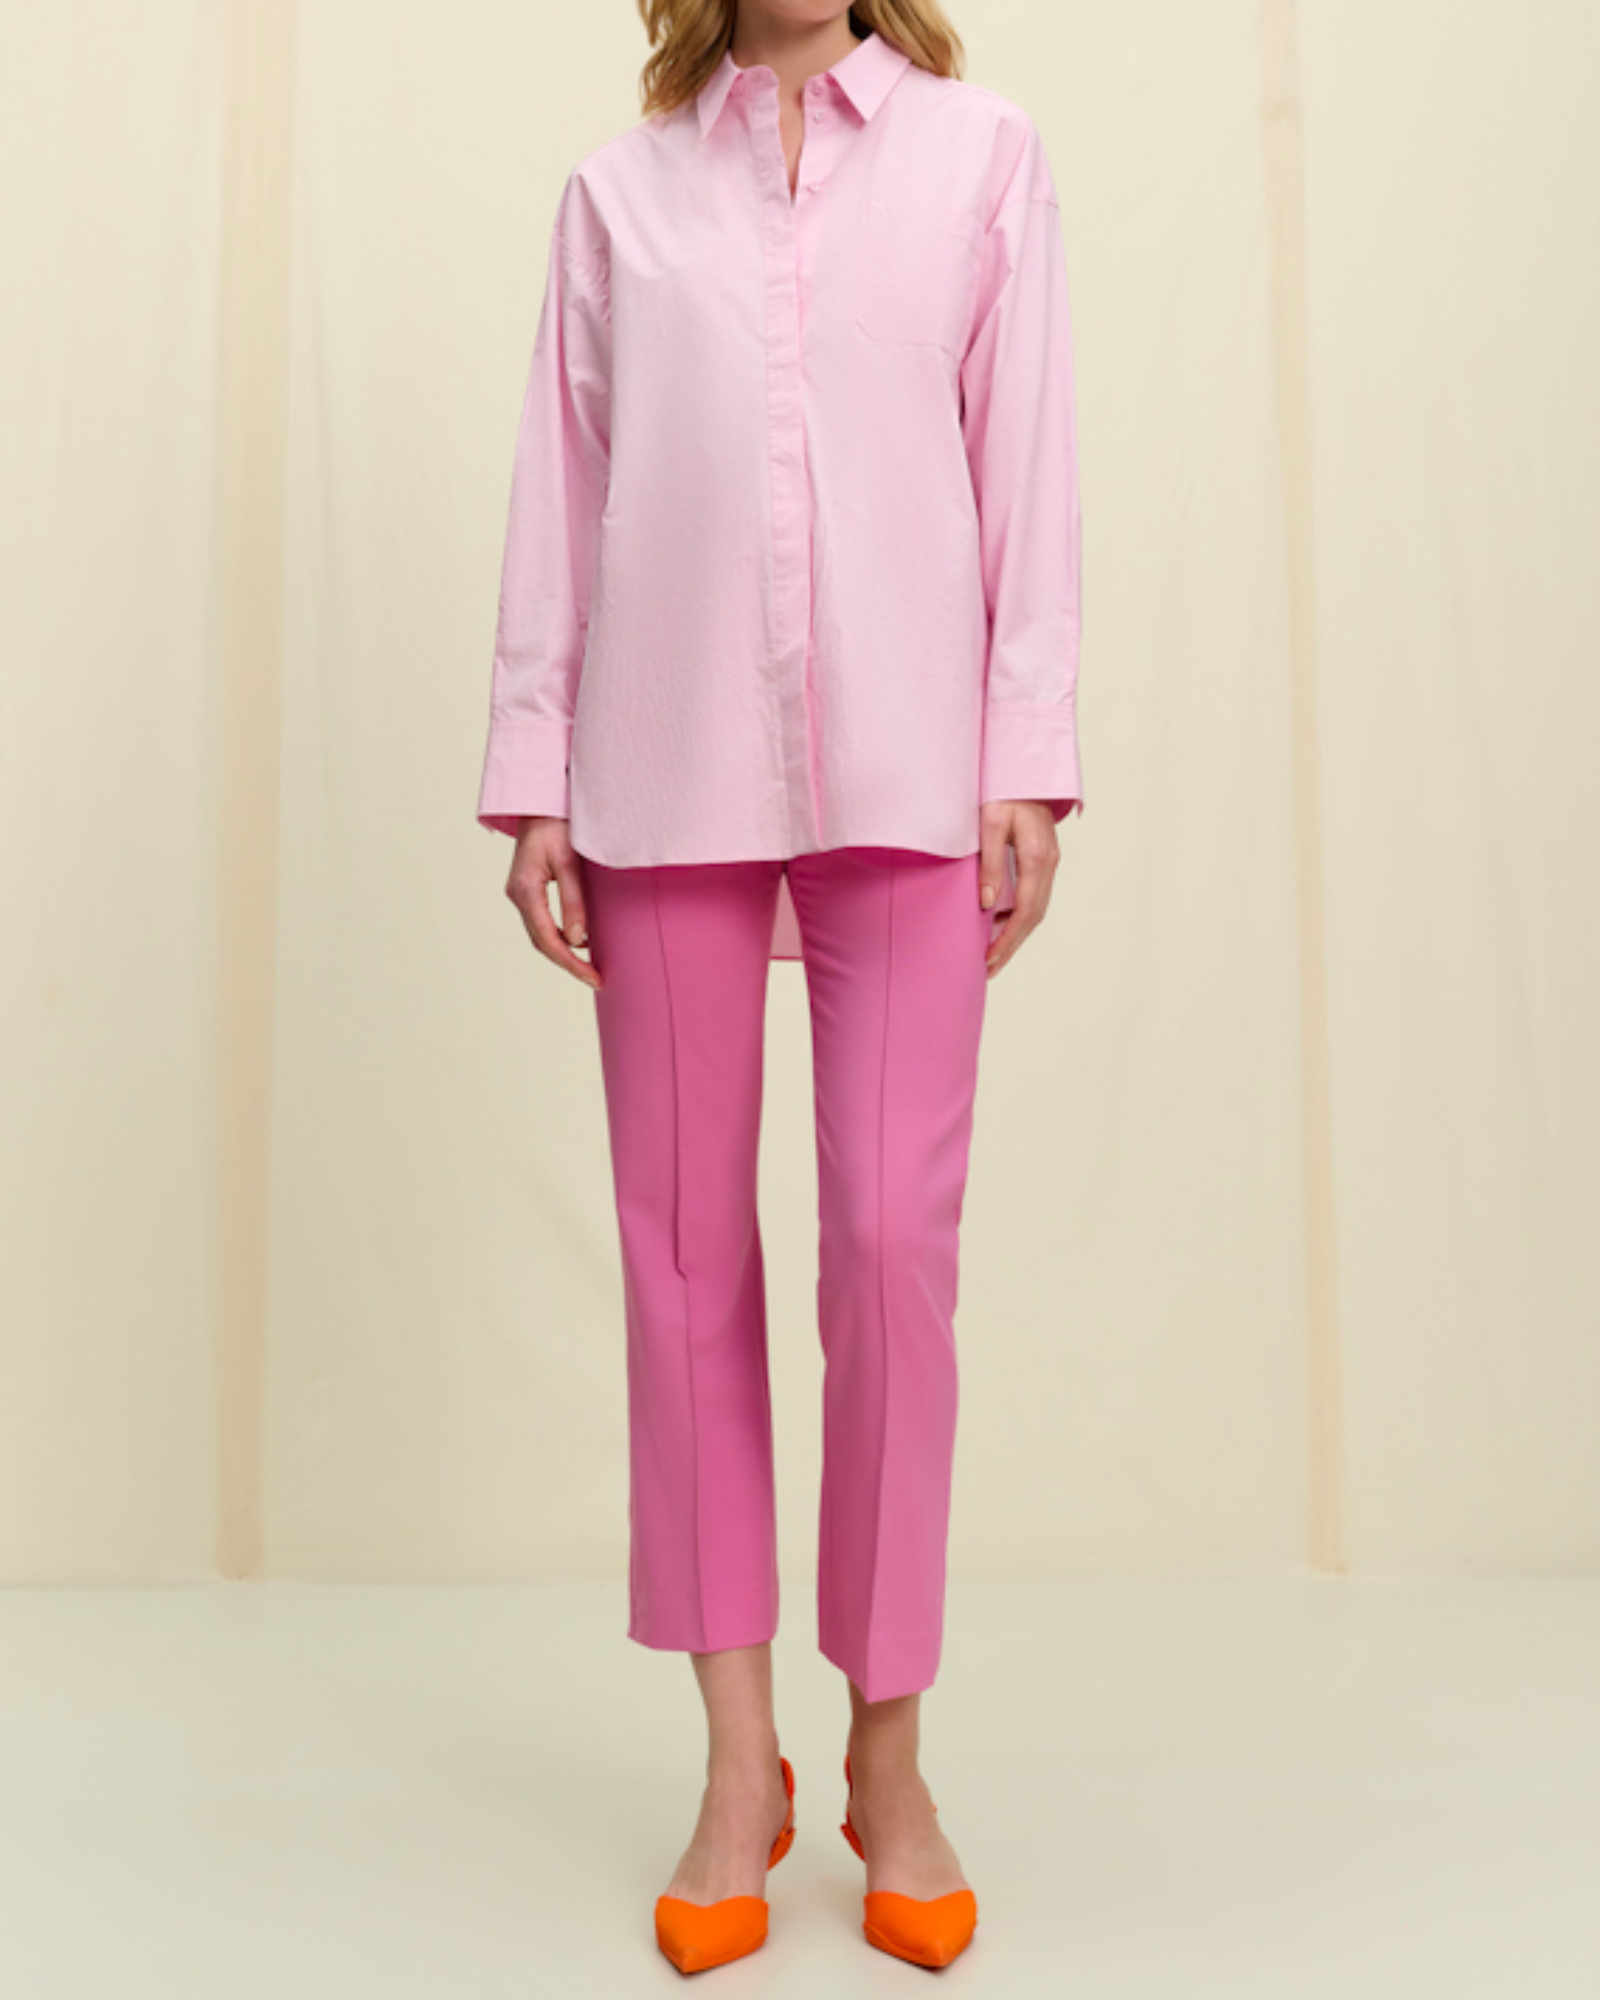 Dorothee Schumacher Cotton Coolness Blouse in Light Pink